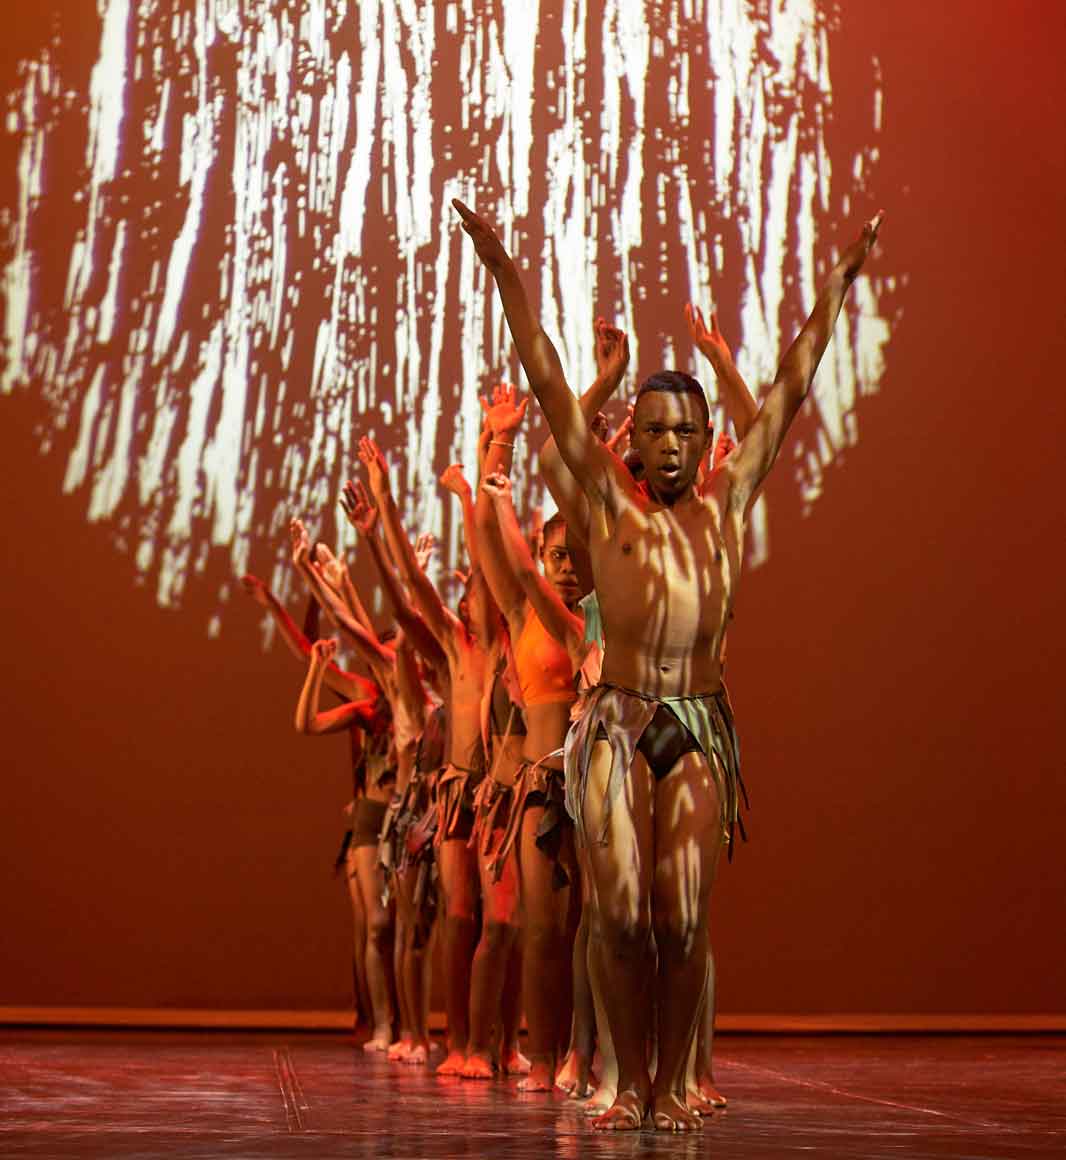 Uthando charity dance project in Cape Town, South Africa